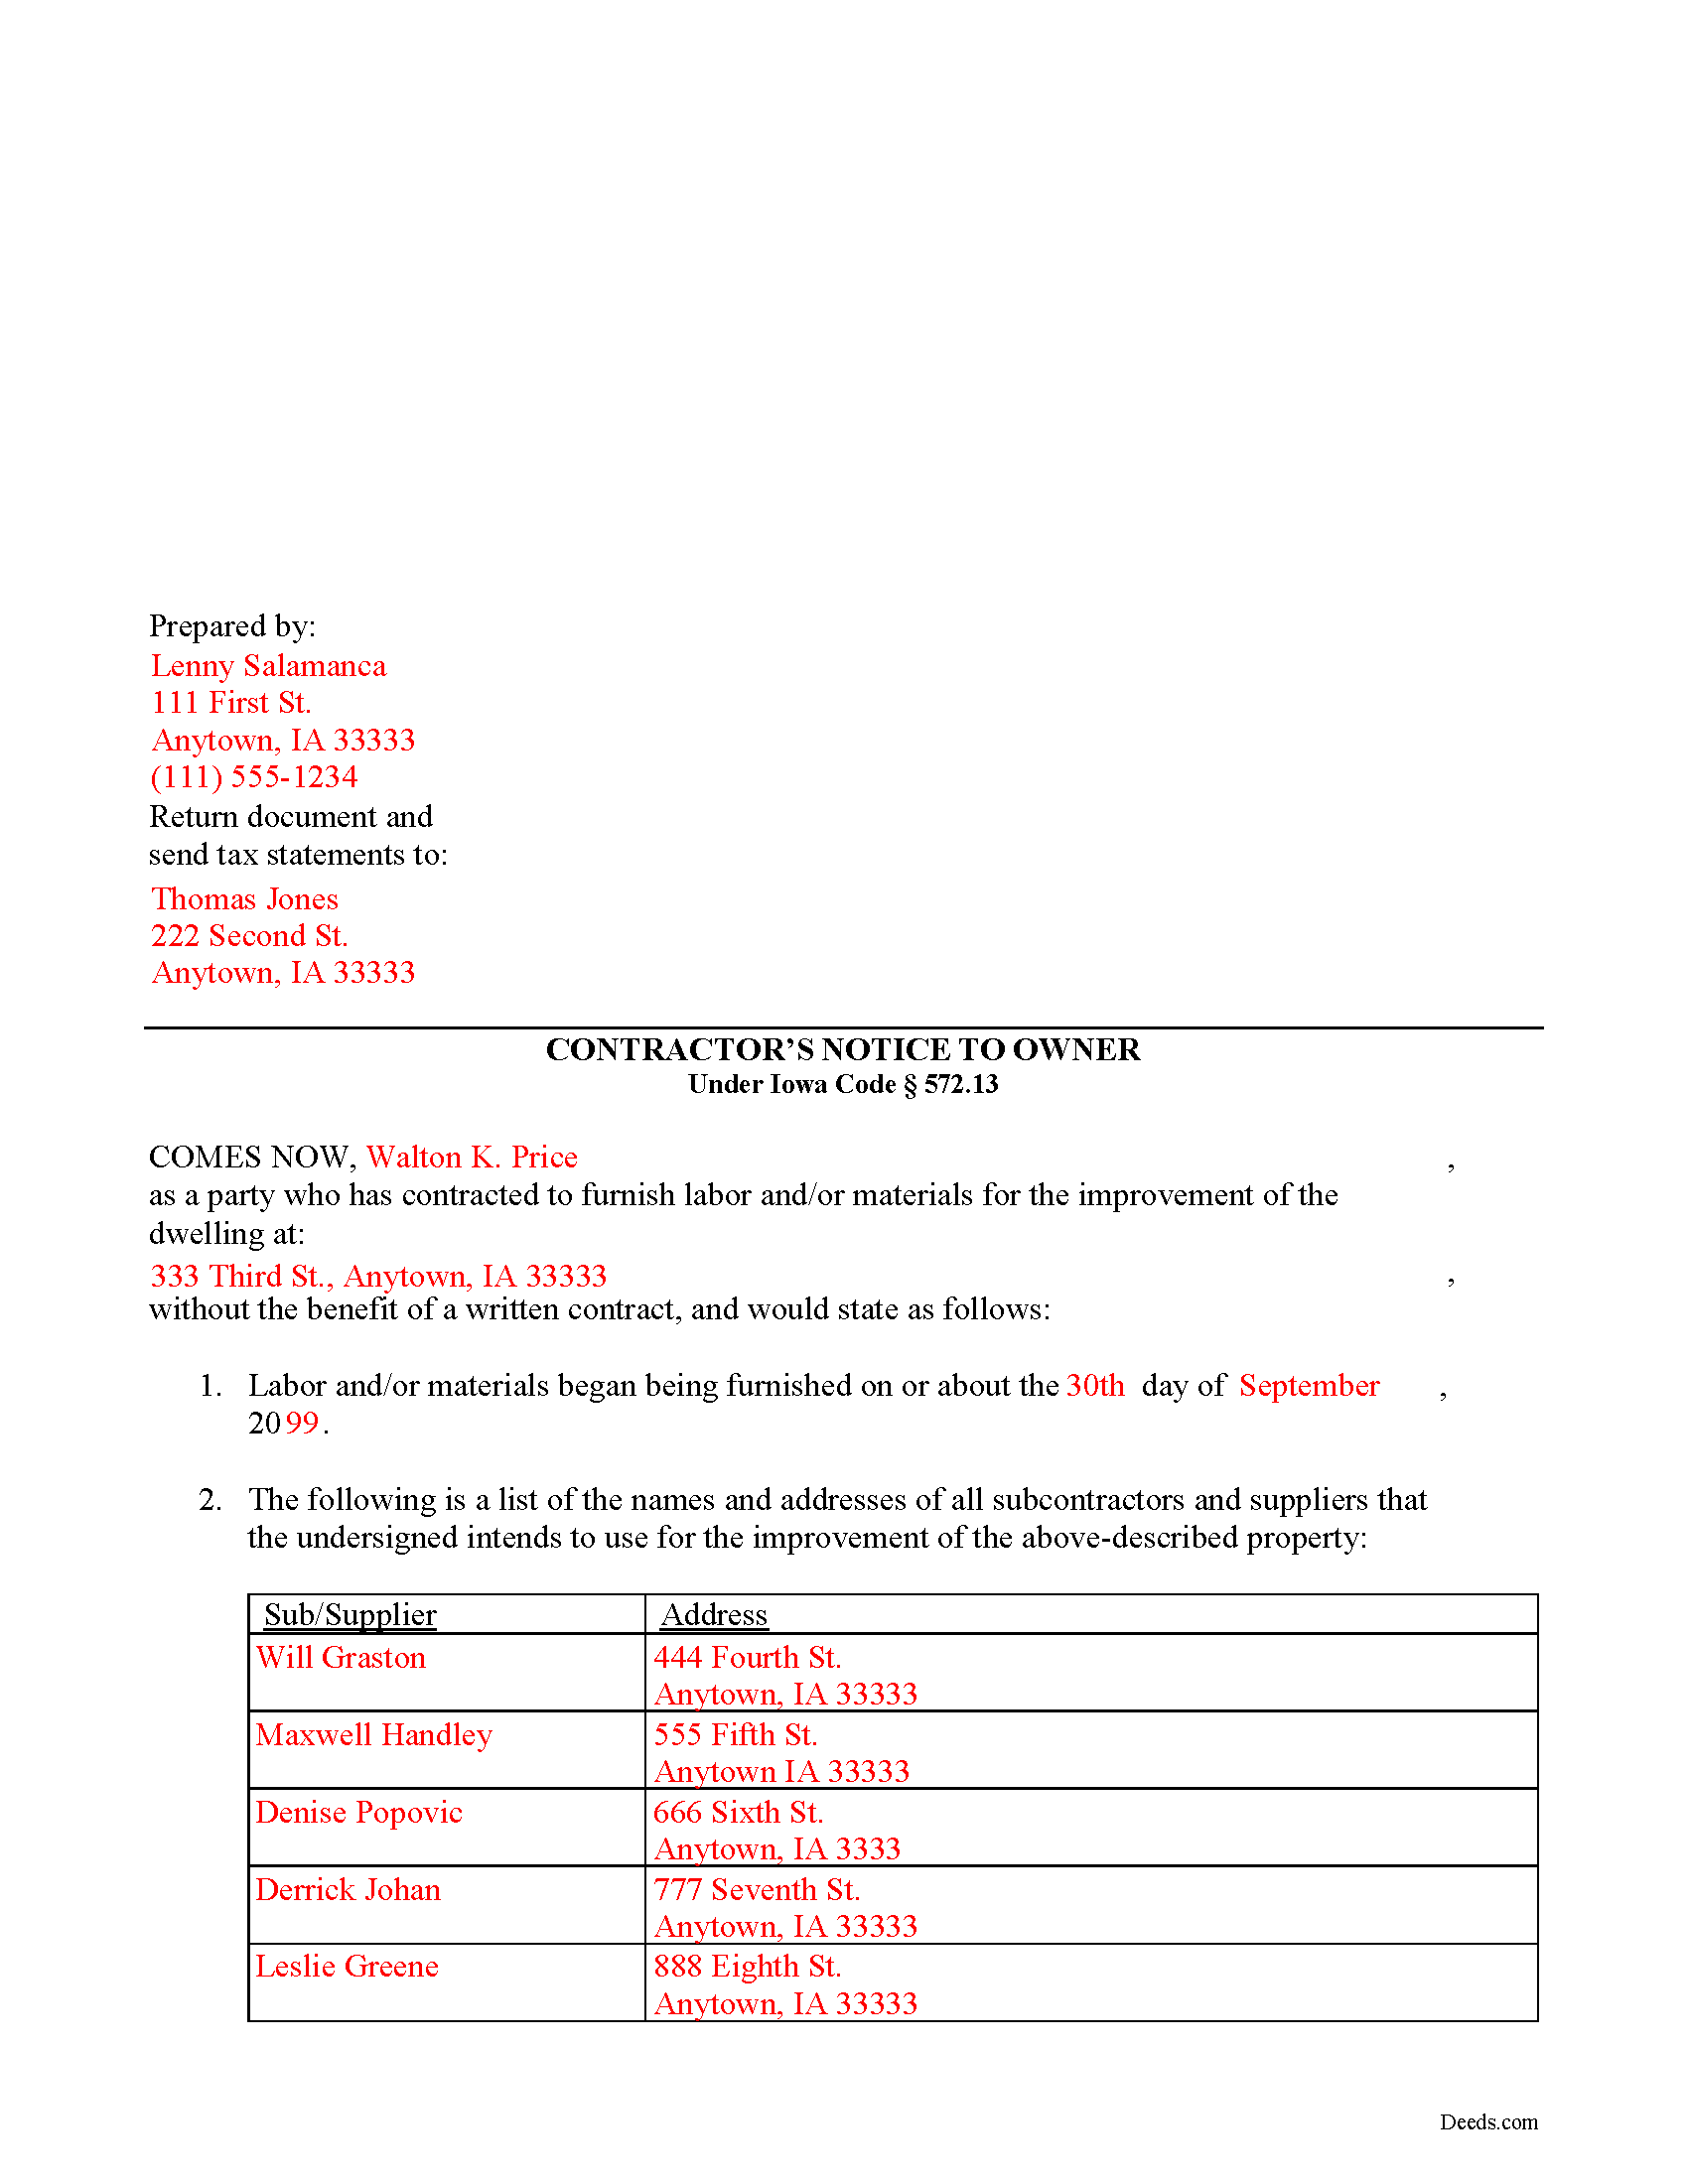 Completed Example of the Contractor Notice to Owner Document